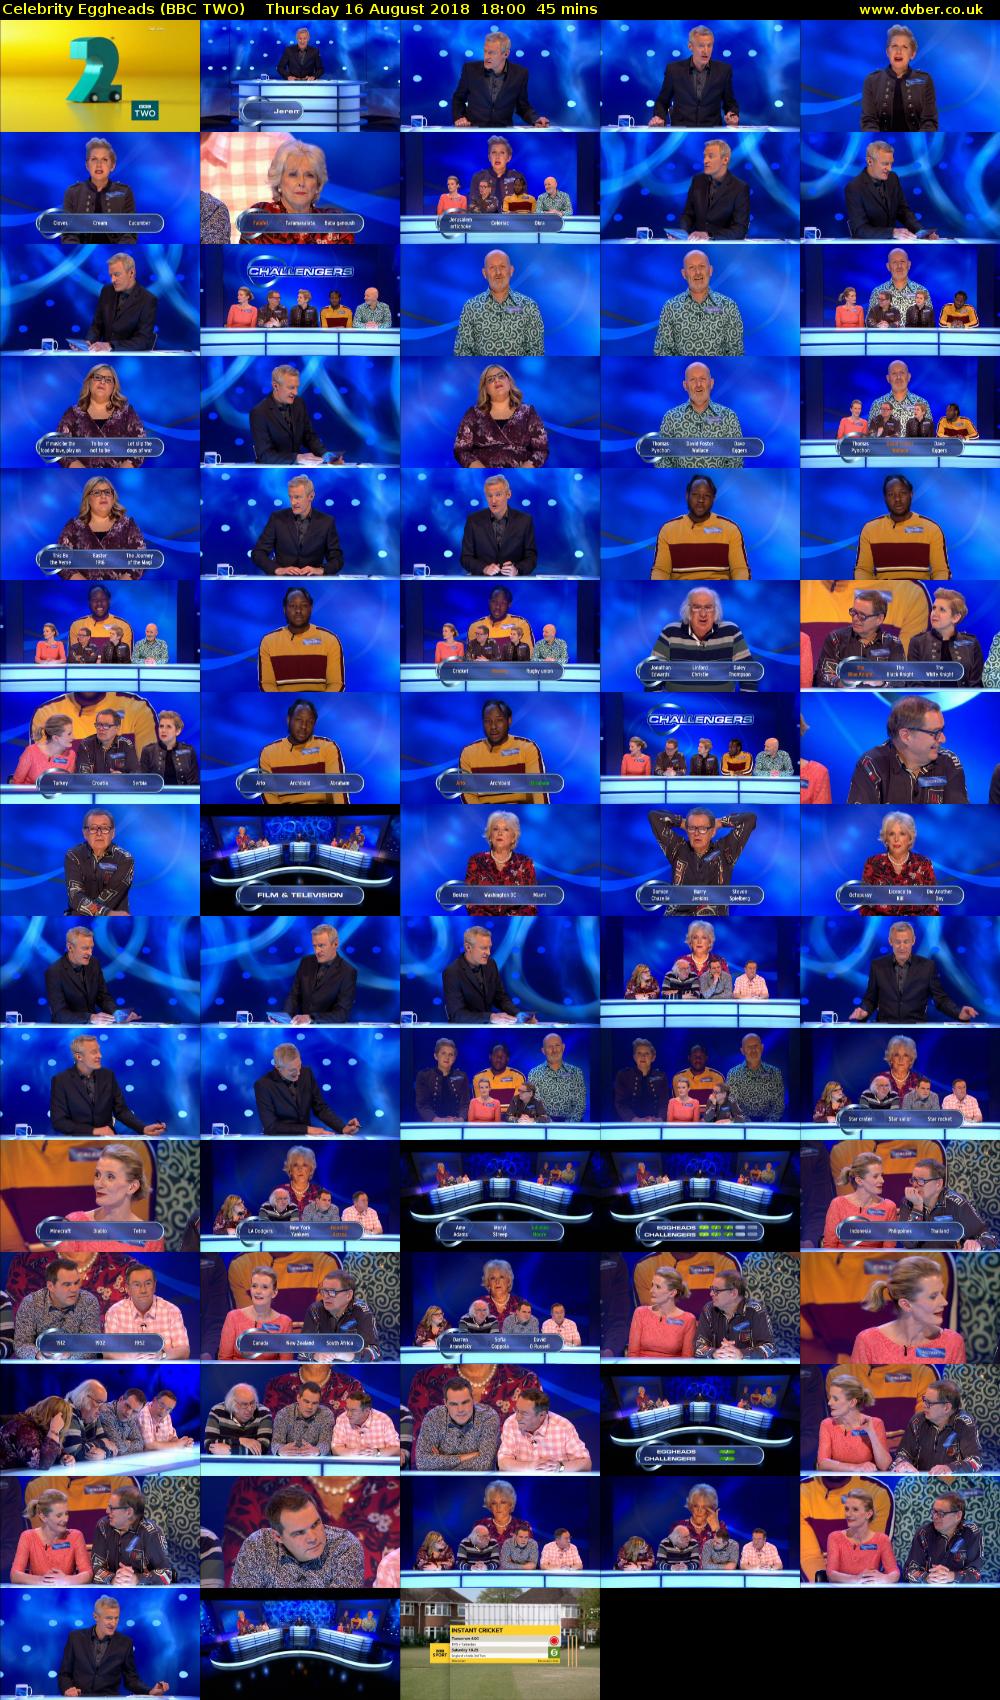 Celebrity Eggheads (BBC TWO) Thursday 16 August 2018 18:00 - 18:45